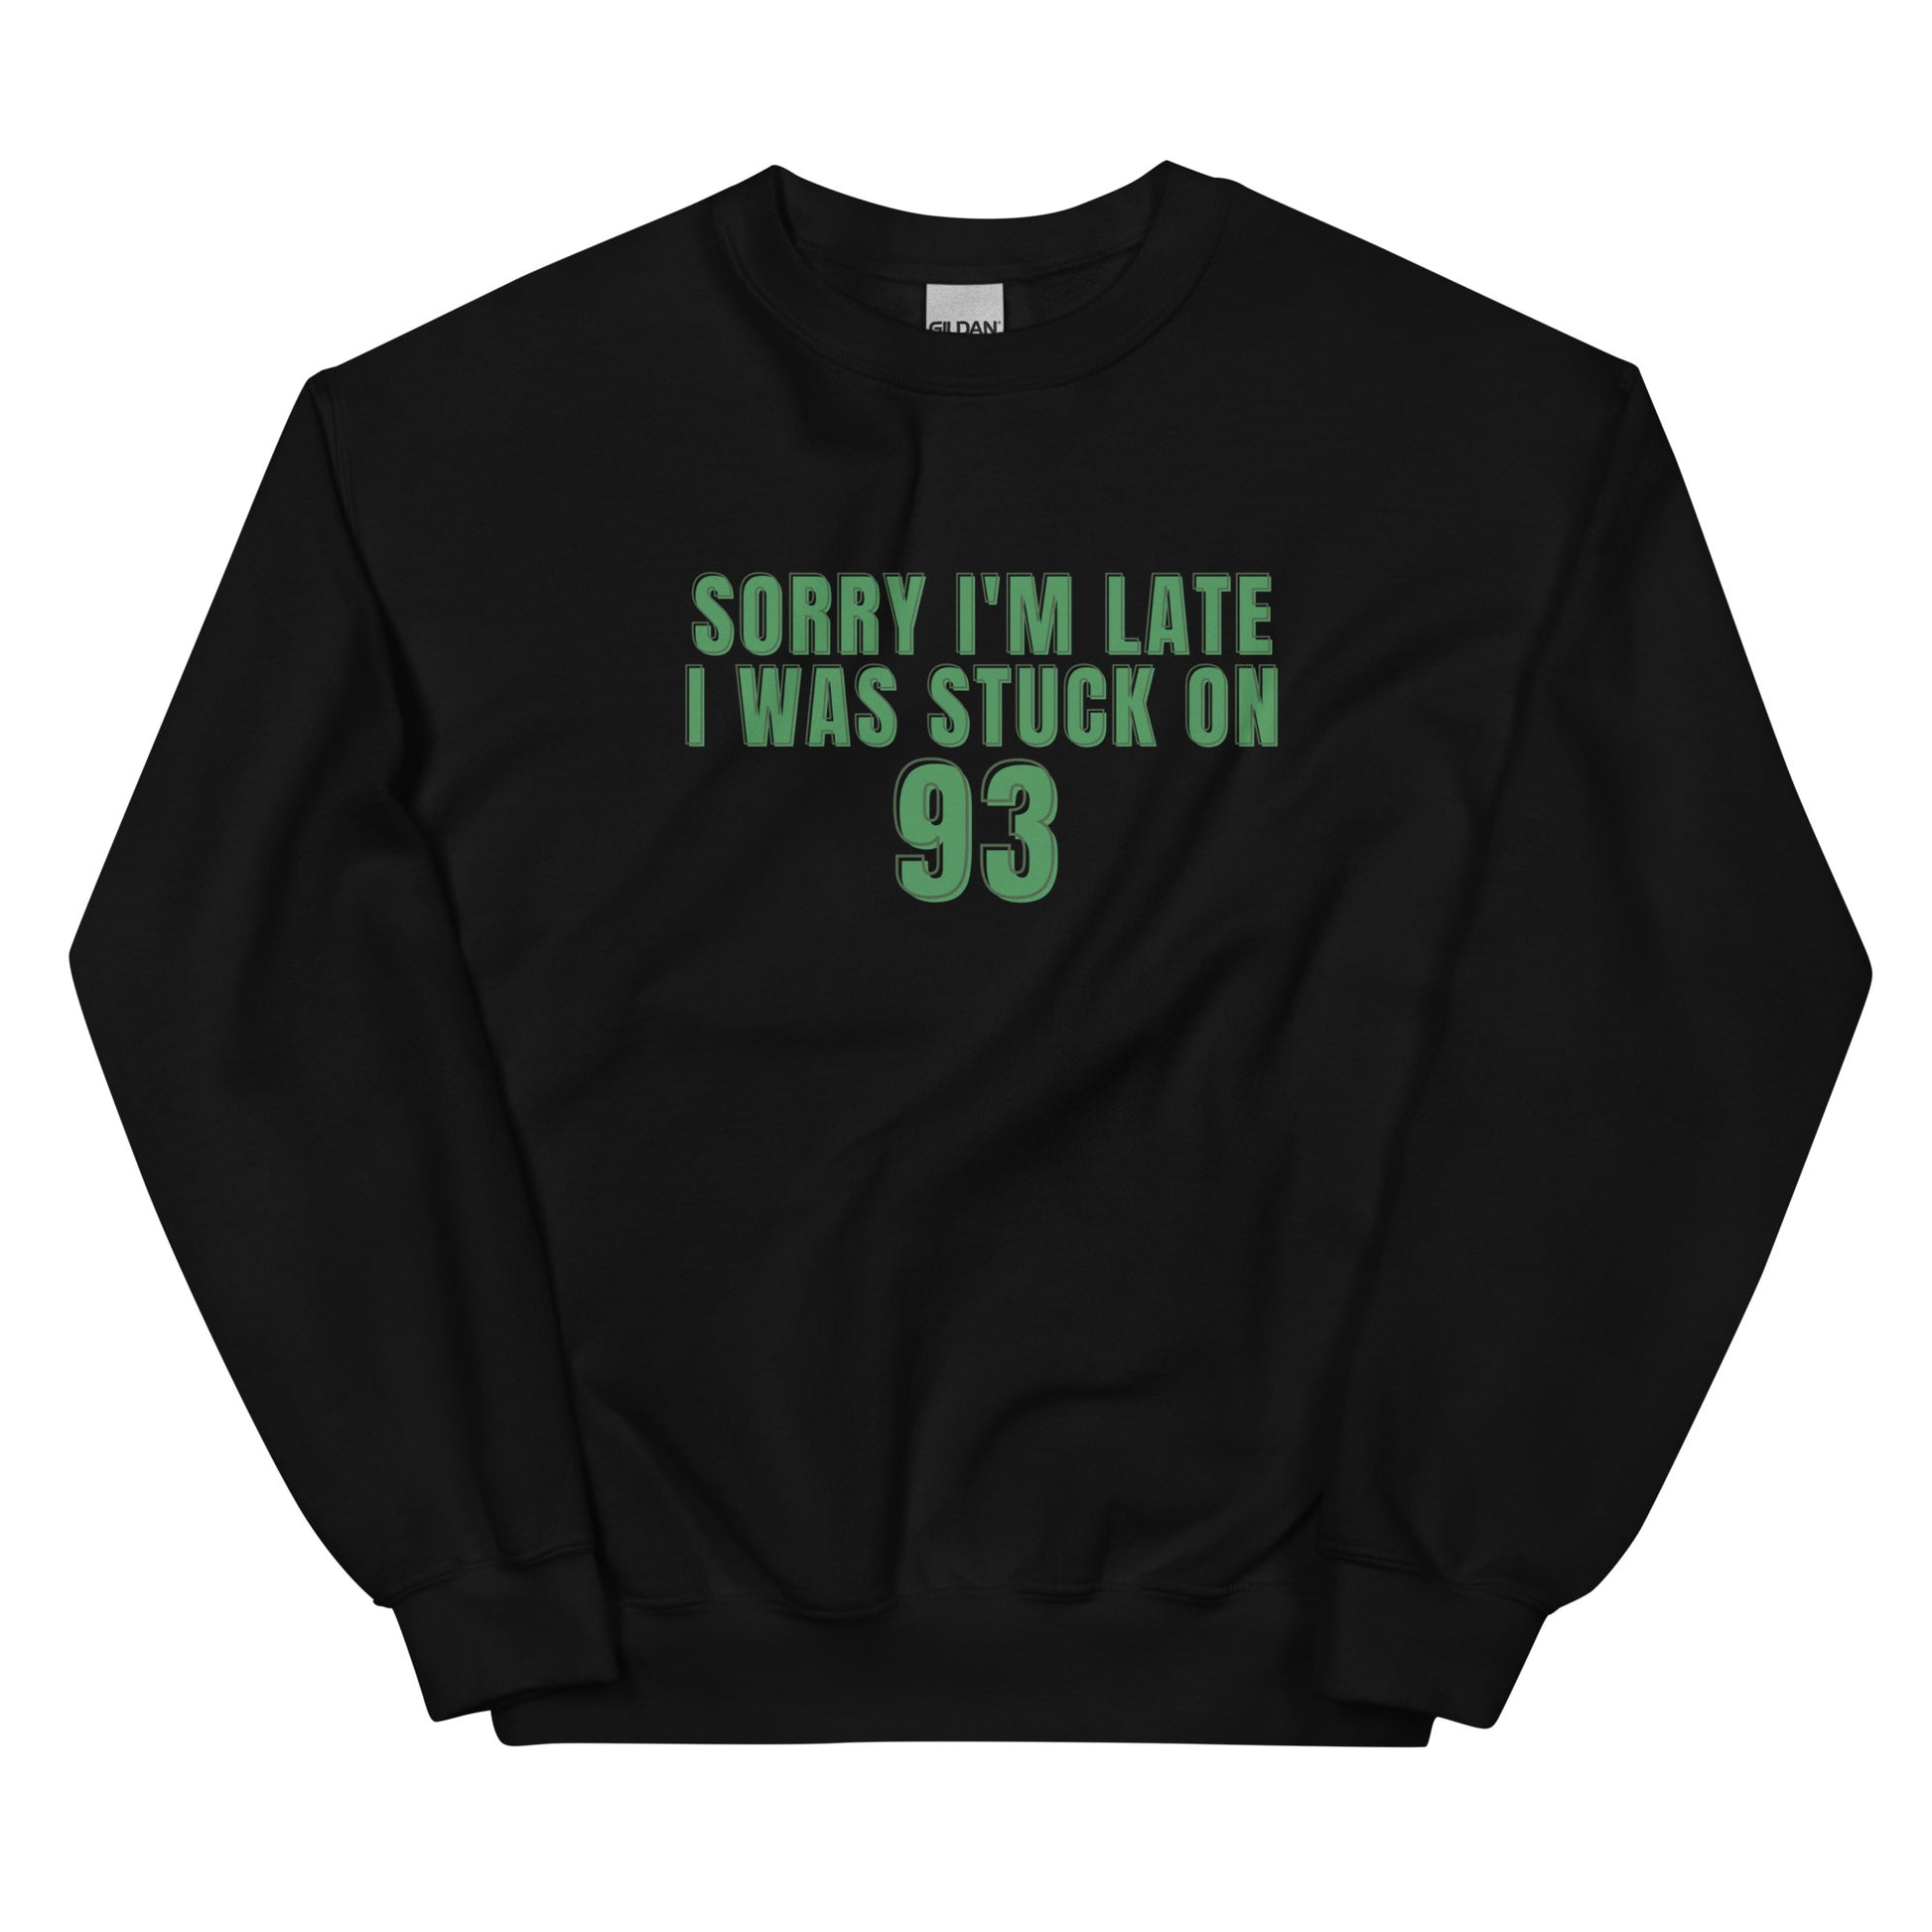 black crewneck that says "sorry i'm late i was stuck on 93" in green lettering